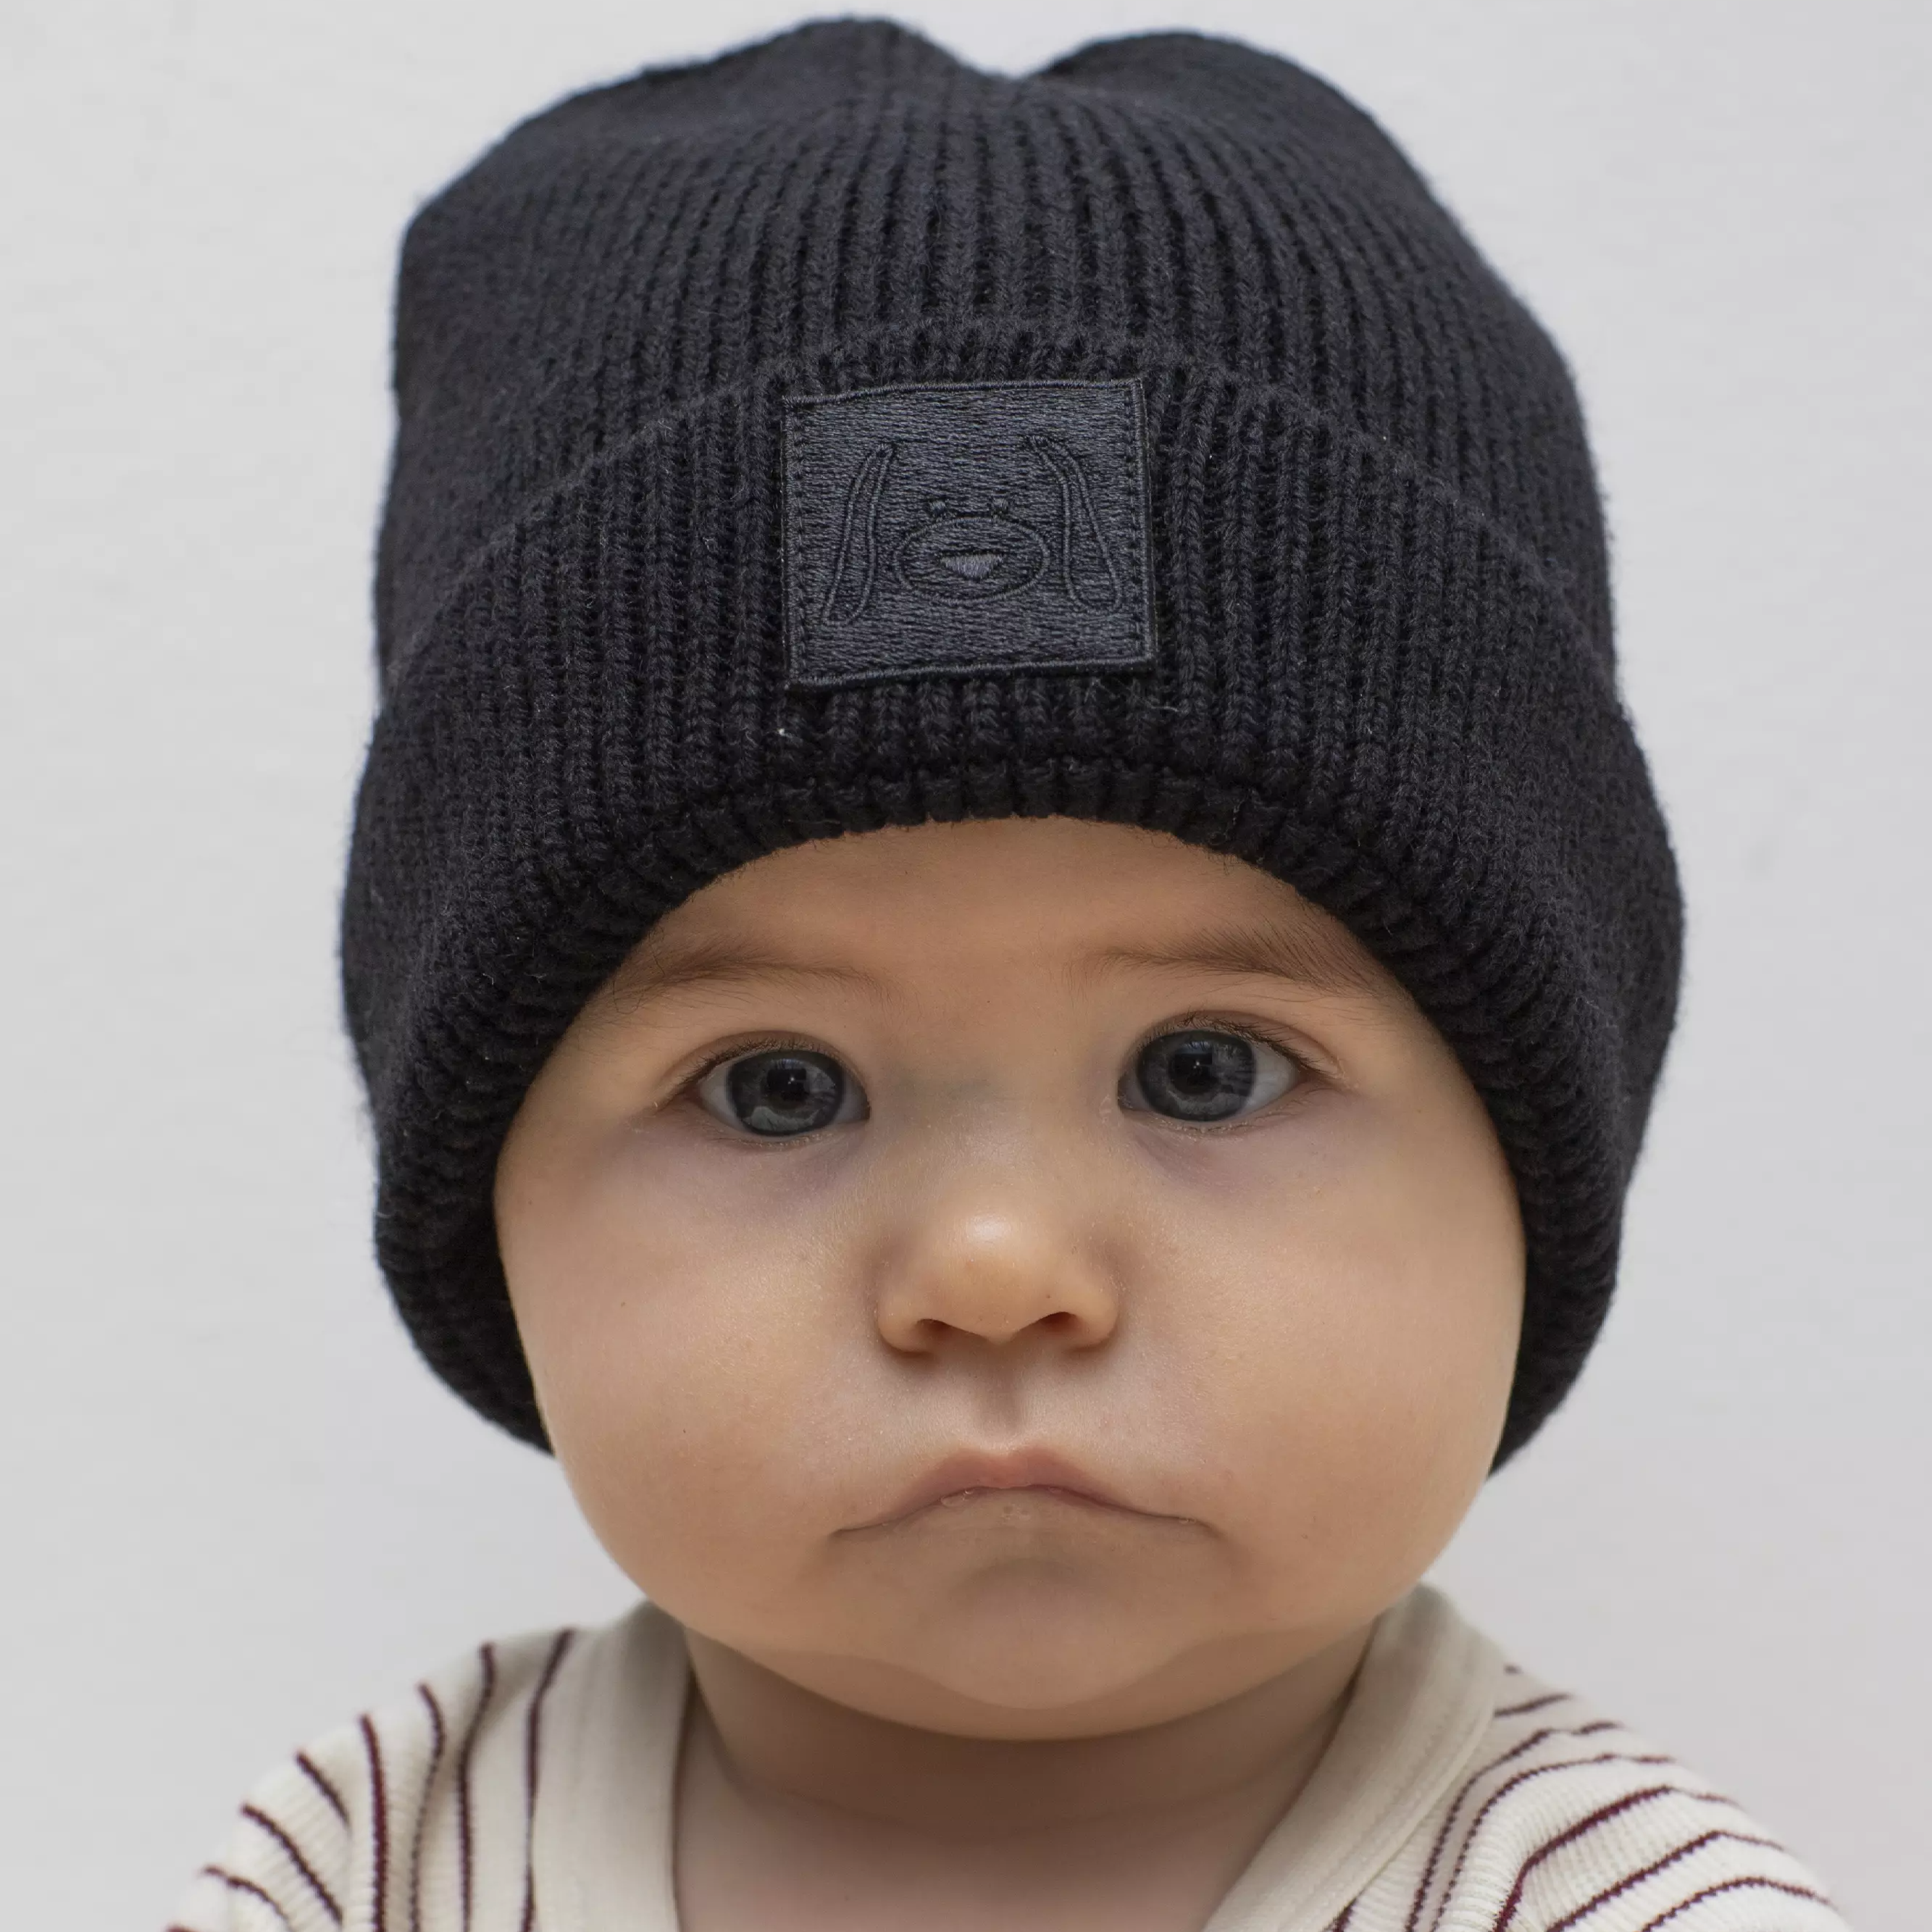 Knitted beanie patched Black